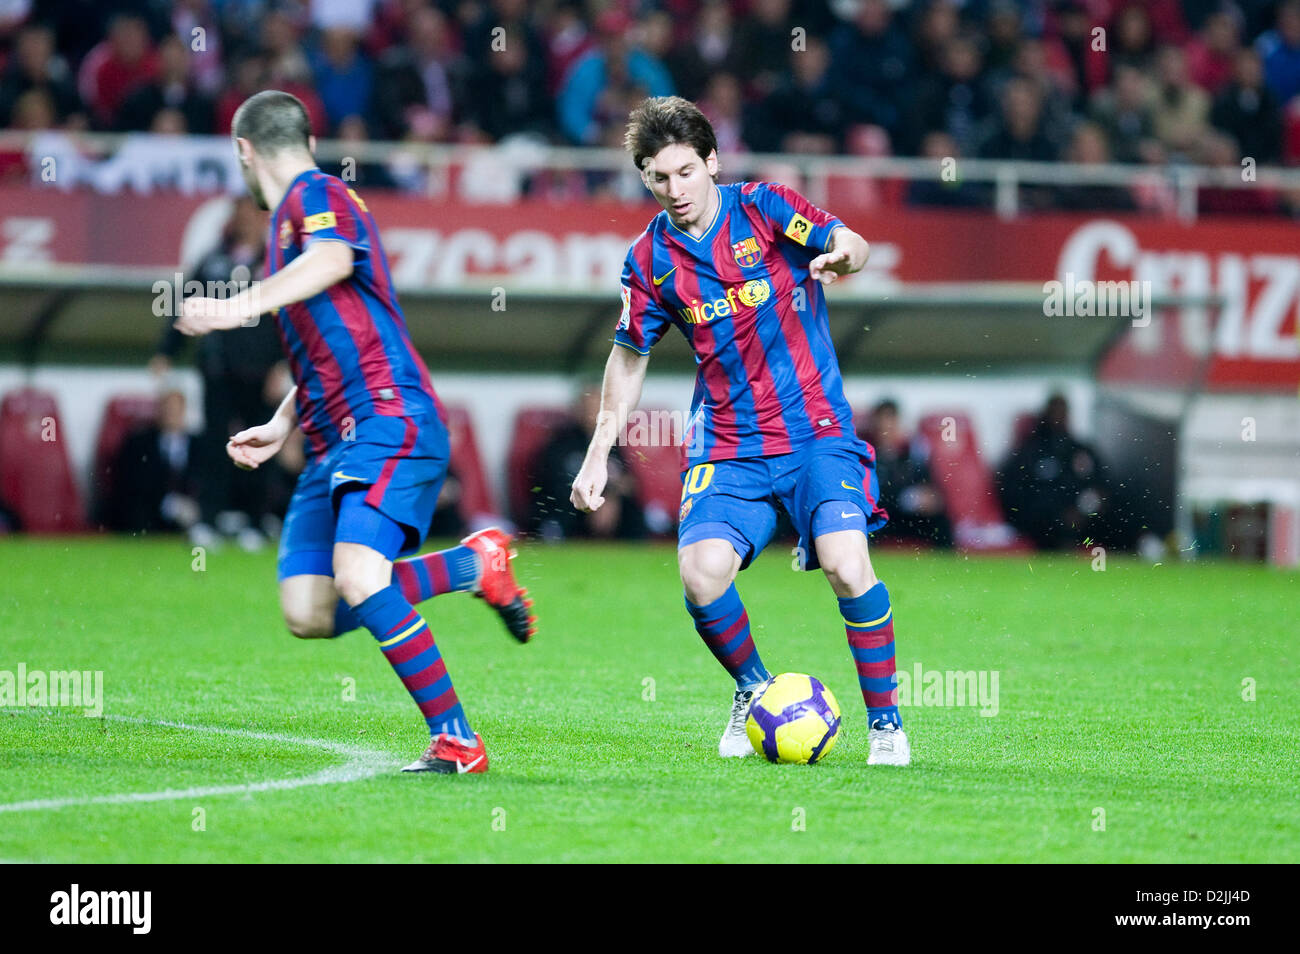 Seville, Spain, the game Sevilla FC against FC Barcelona at the Copa del Rey Stock Photo